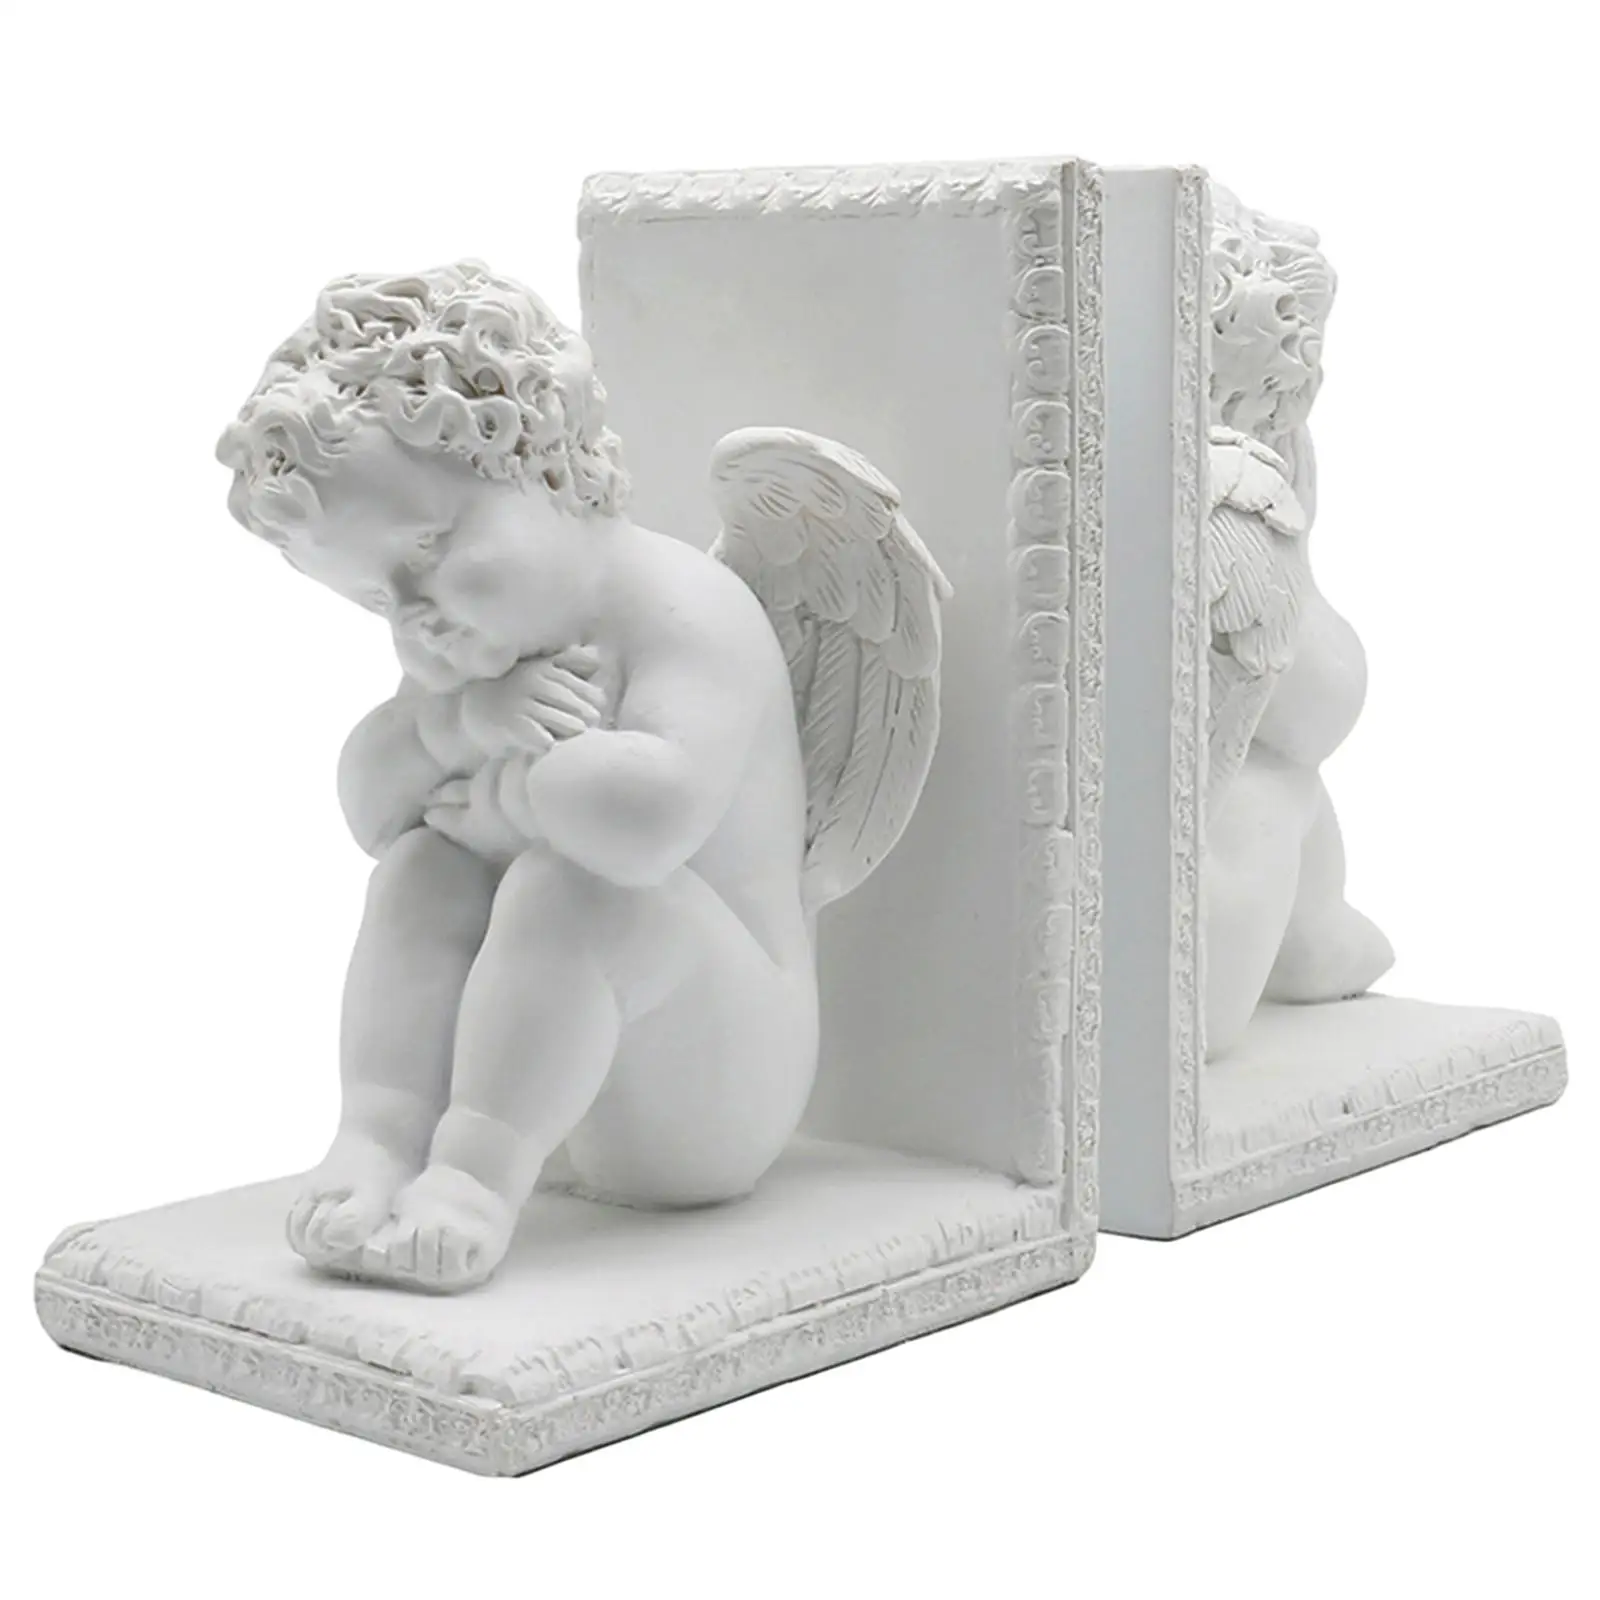 2 Pieces Angel Statues Bookends Book Supports Decorative Figurine Sculpture for Shelves Cabinet Desk Living Room Home Decoration